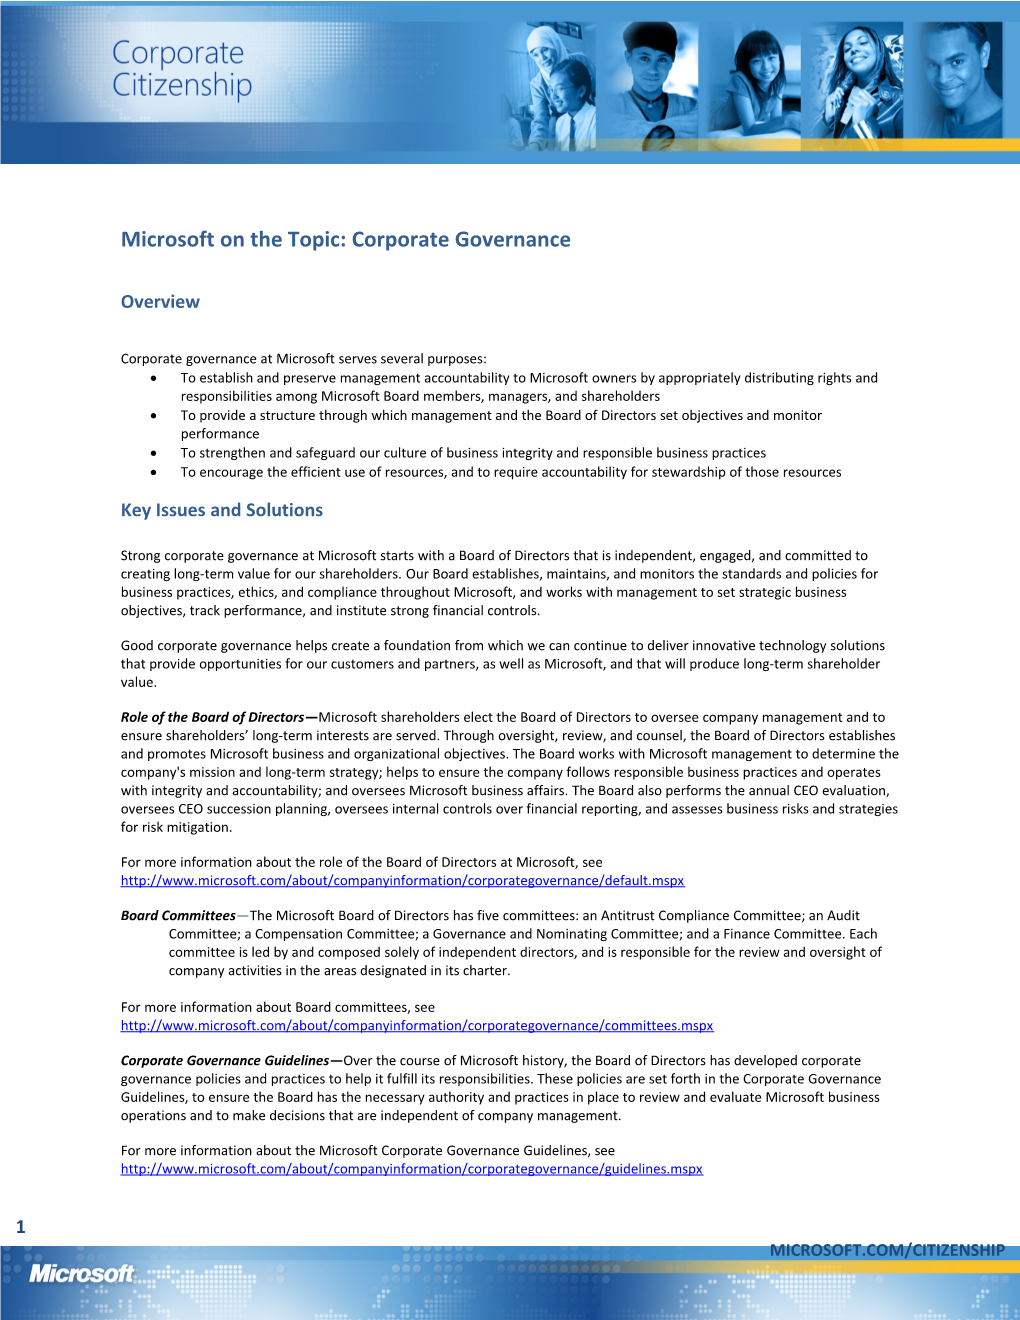 Microsoft on the Topic: Corporate Governance